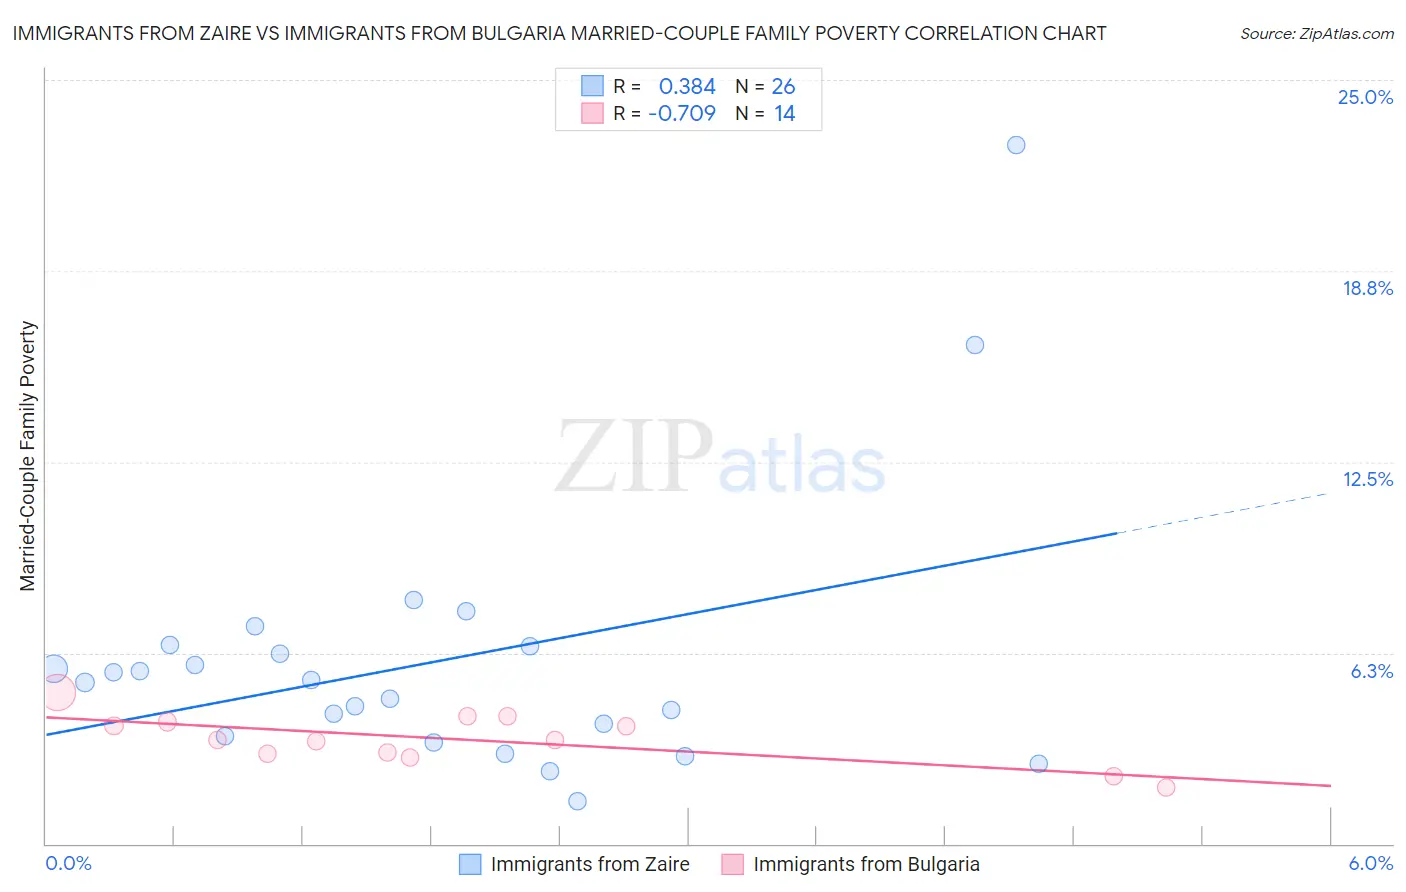 Immigrants from Zaire vs Immigrants from Bulgaria Married-Couple Family Poverty